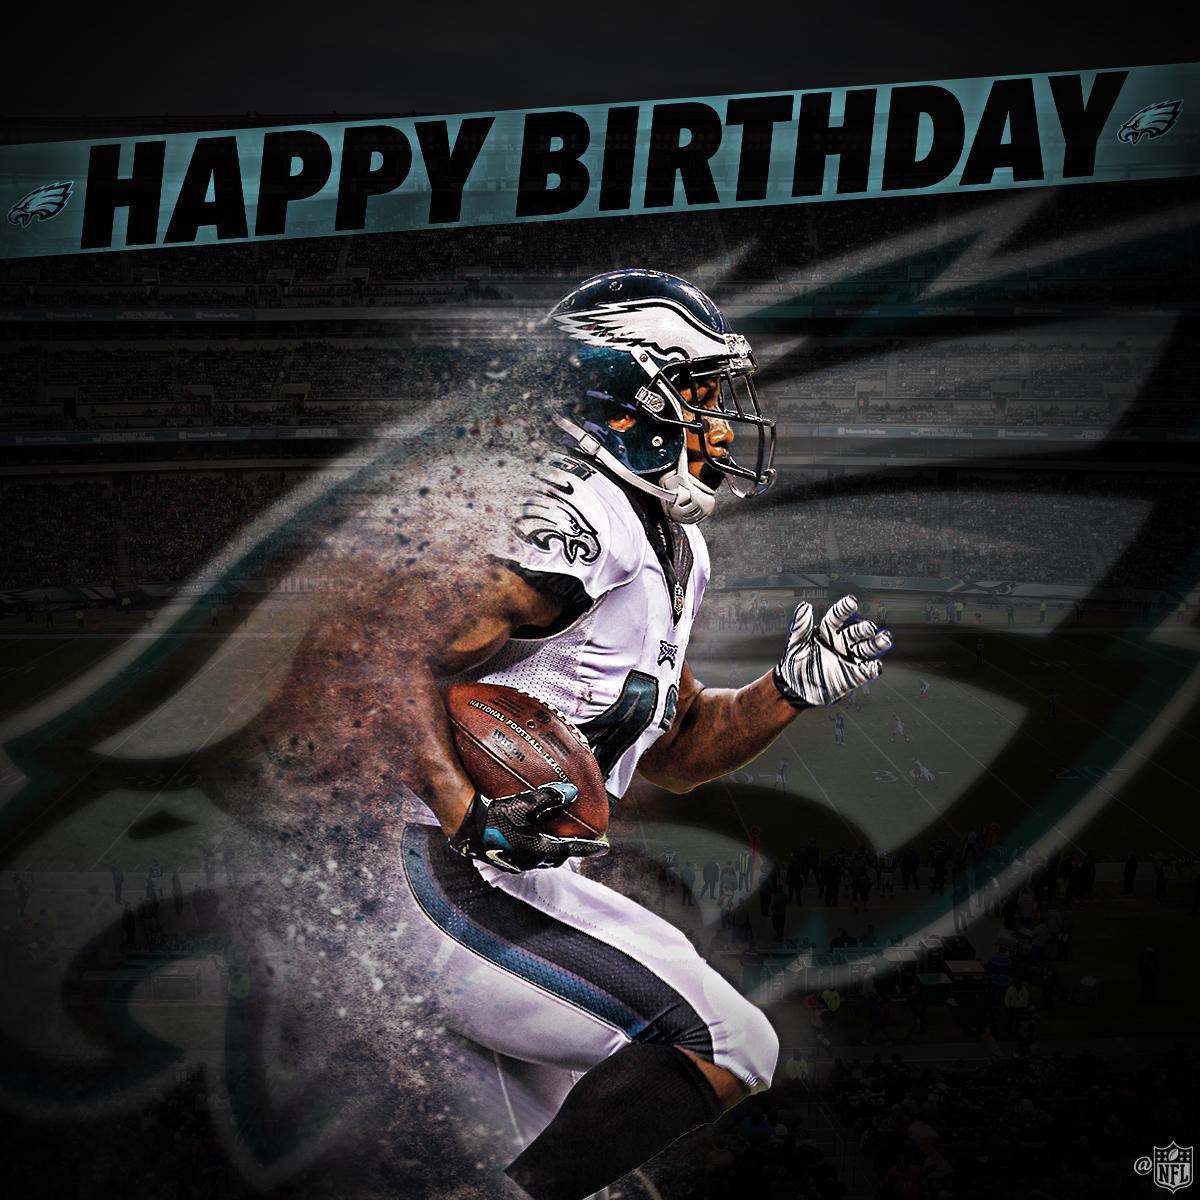 nfl-ar-twitter-join-us-in-wishing-a-happy-birthday-to-eagles-rb